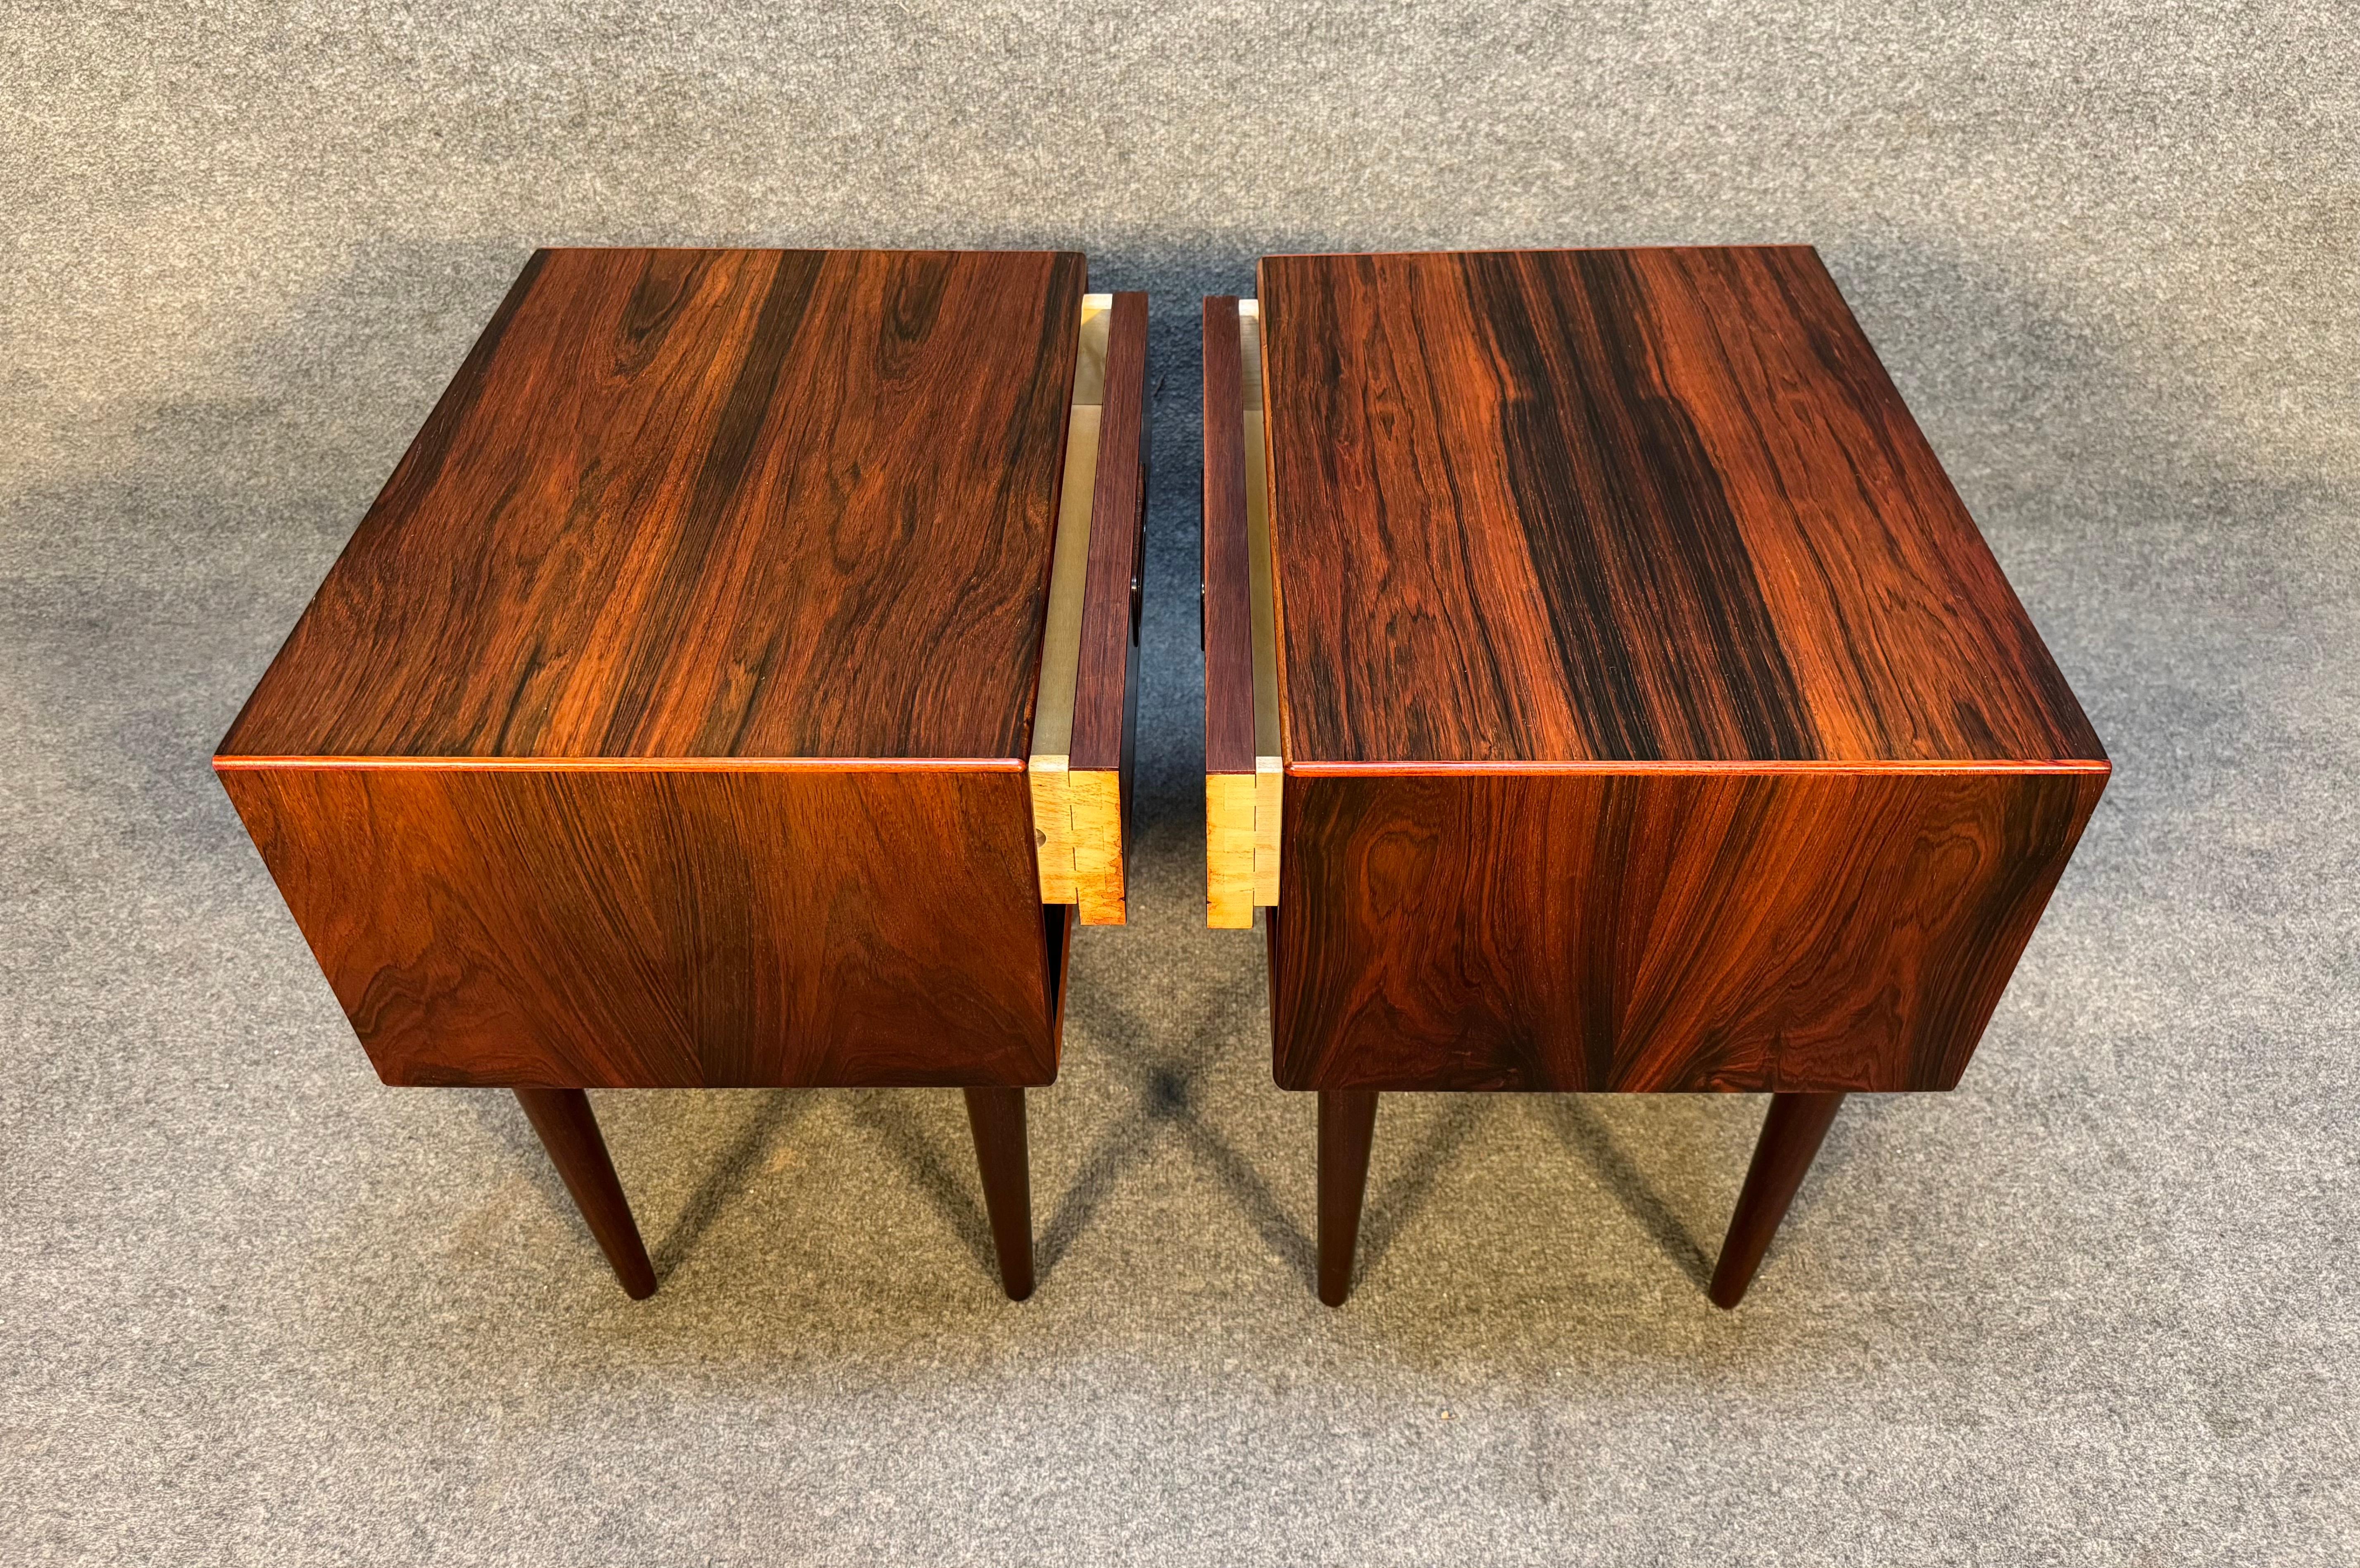 Here is a lovely set of two scandinavian modern nightstands in rosewood manufactured in Denmark in the 1960's.
This pair, recently imported from Europe to California before its refinishing, features a vibrant wood grain, a single drawer with